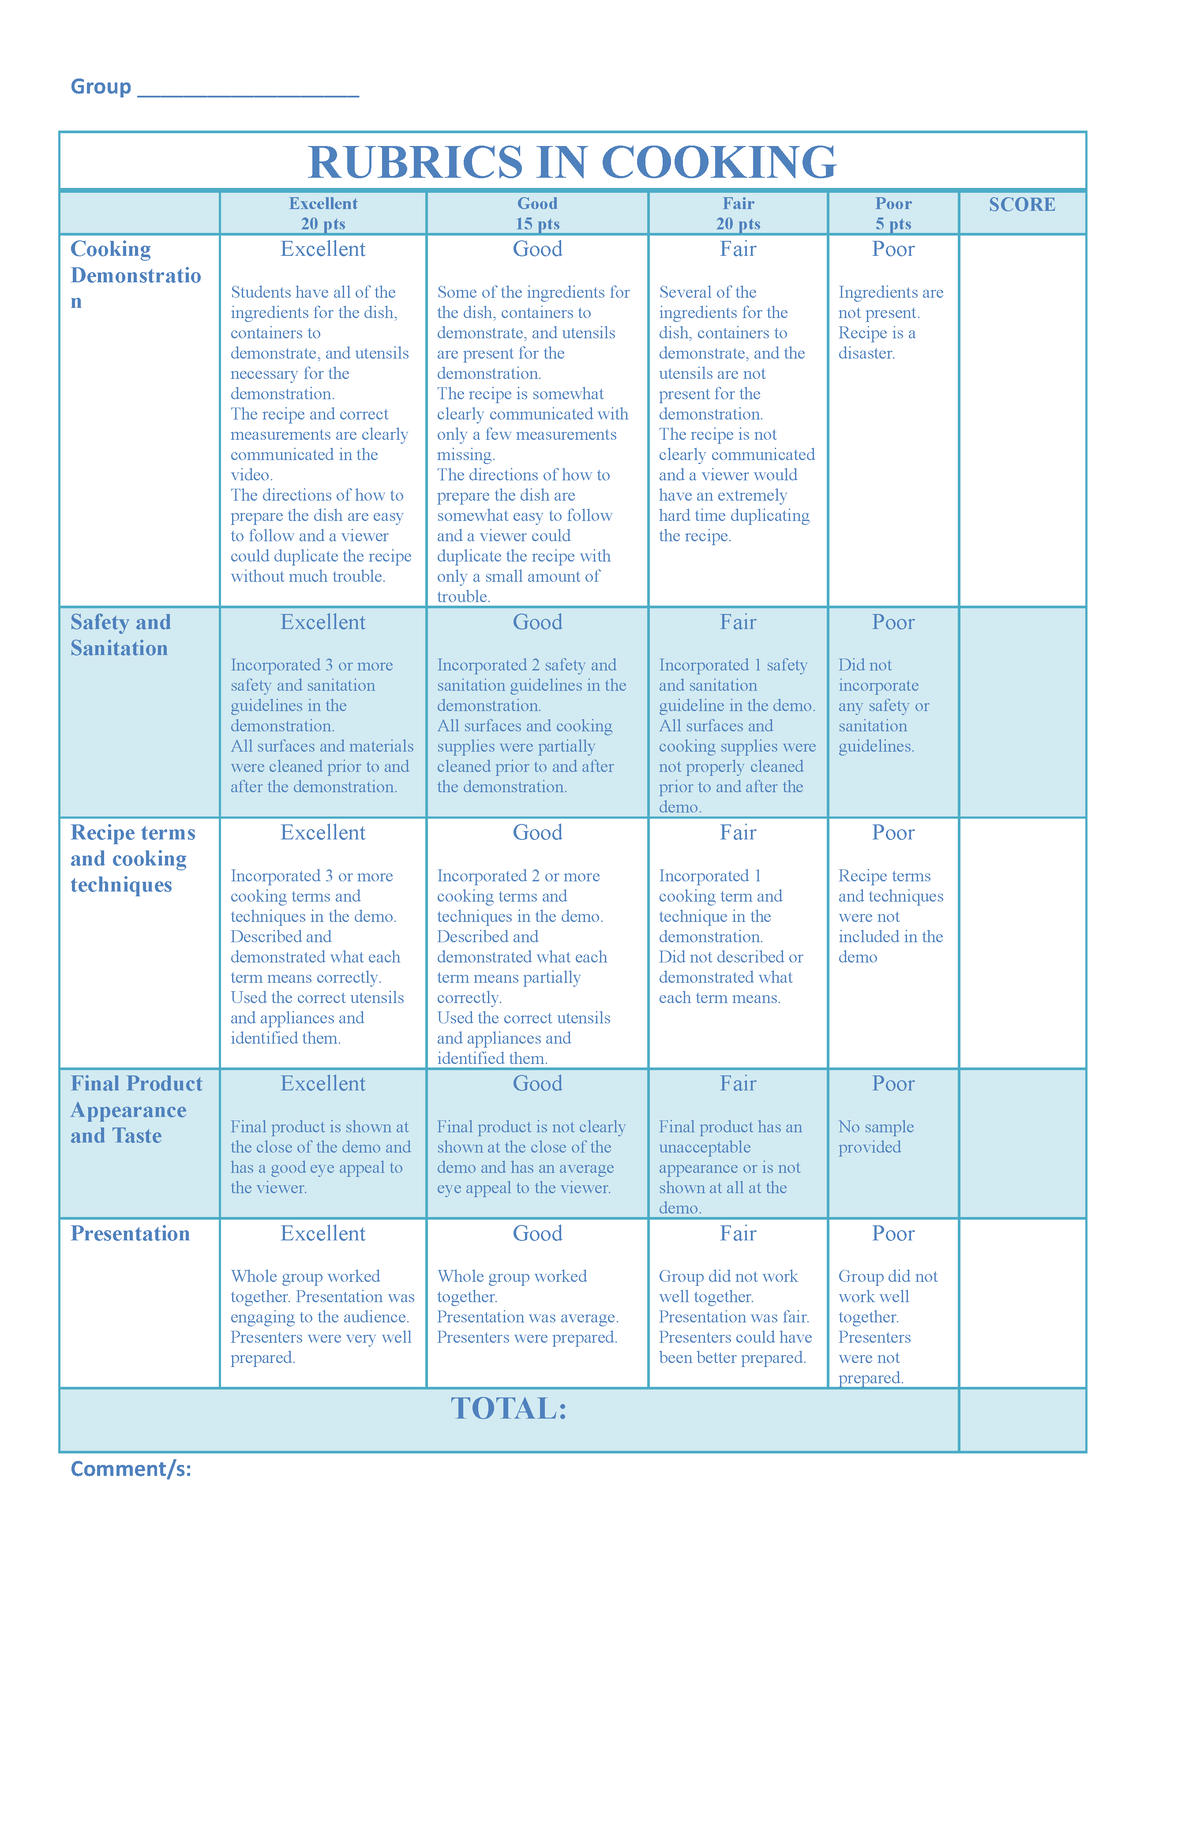 Rubrics In Cooking A Rubric For Performance Task Group Comments 4259